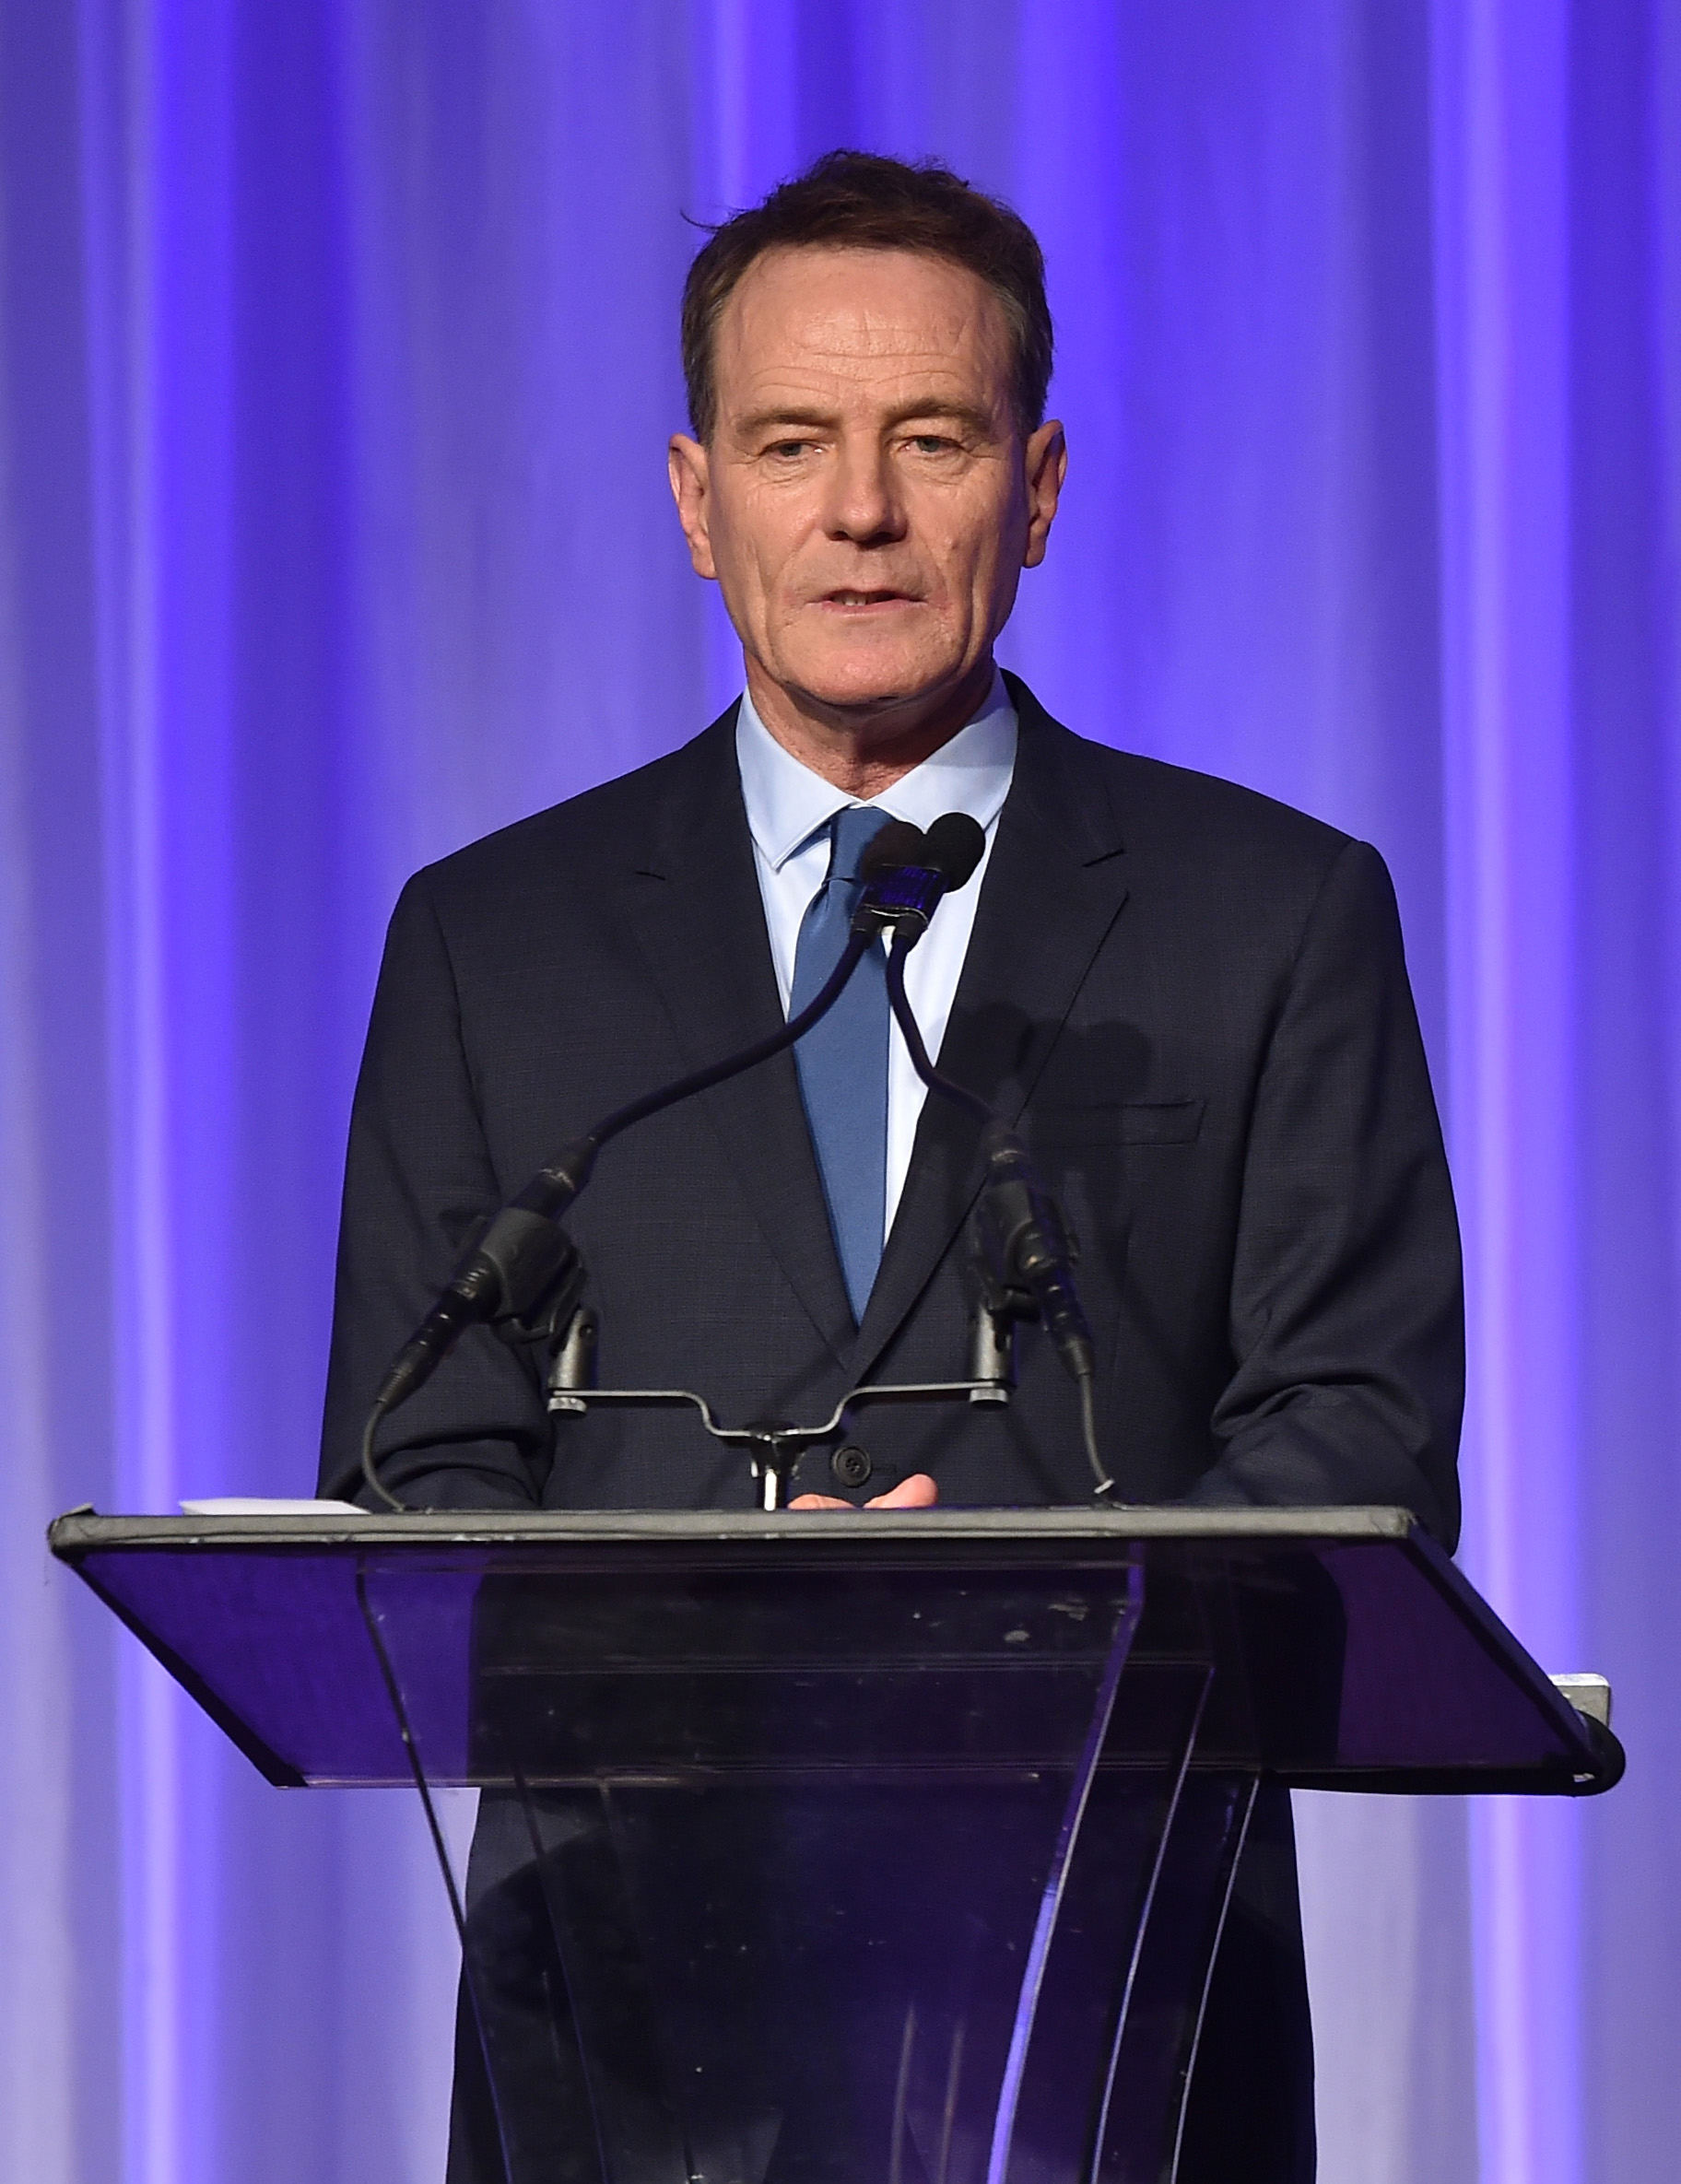 Actor Bryan Cranston accepts grant on behalf of LACC onstage during HFPA Annual Grants Banquet at the Beverly Wilshire Four Seasons Hotel on August 13, 2015 in Beverly Hills, California. (Kevin Winter&mdash;Getty Images)